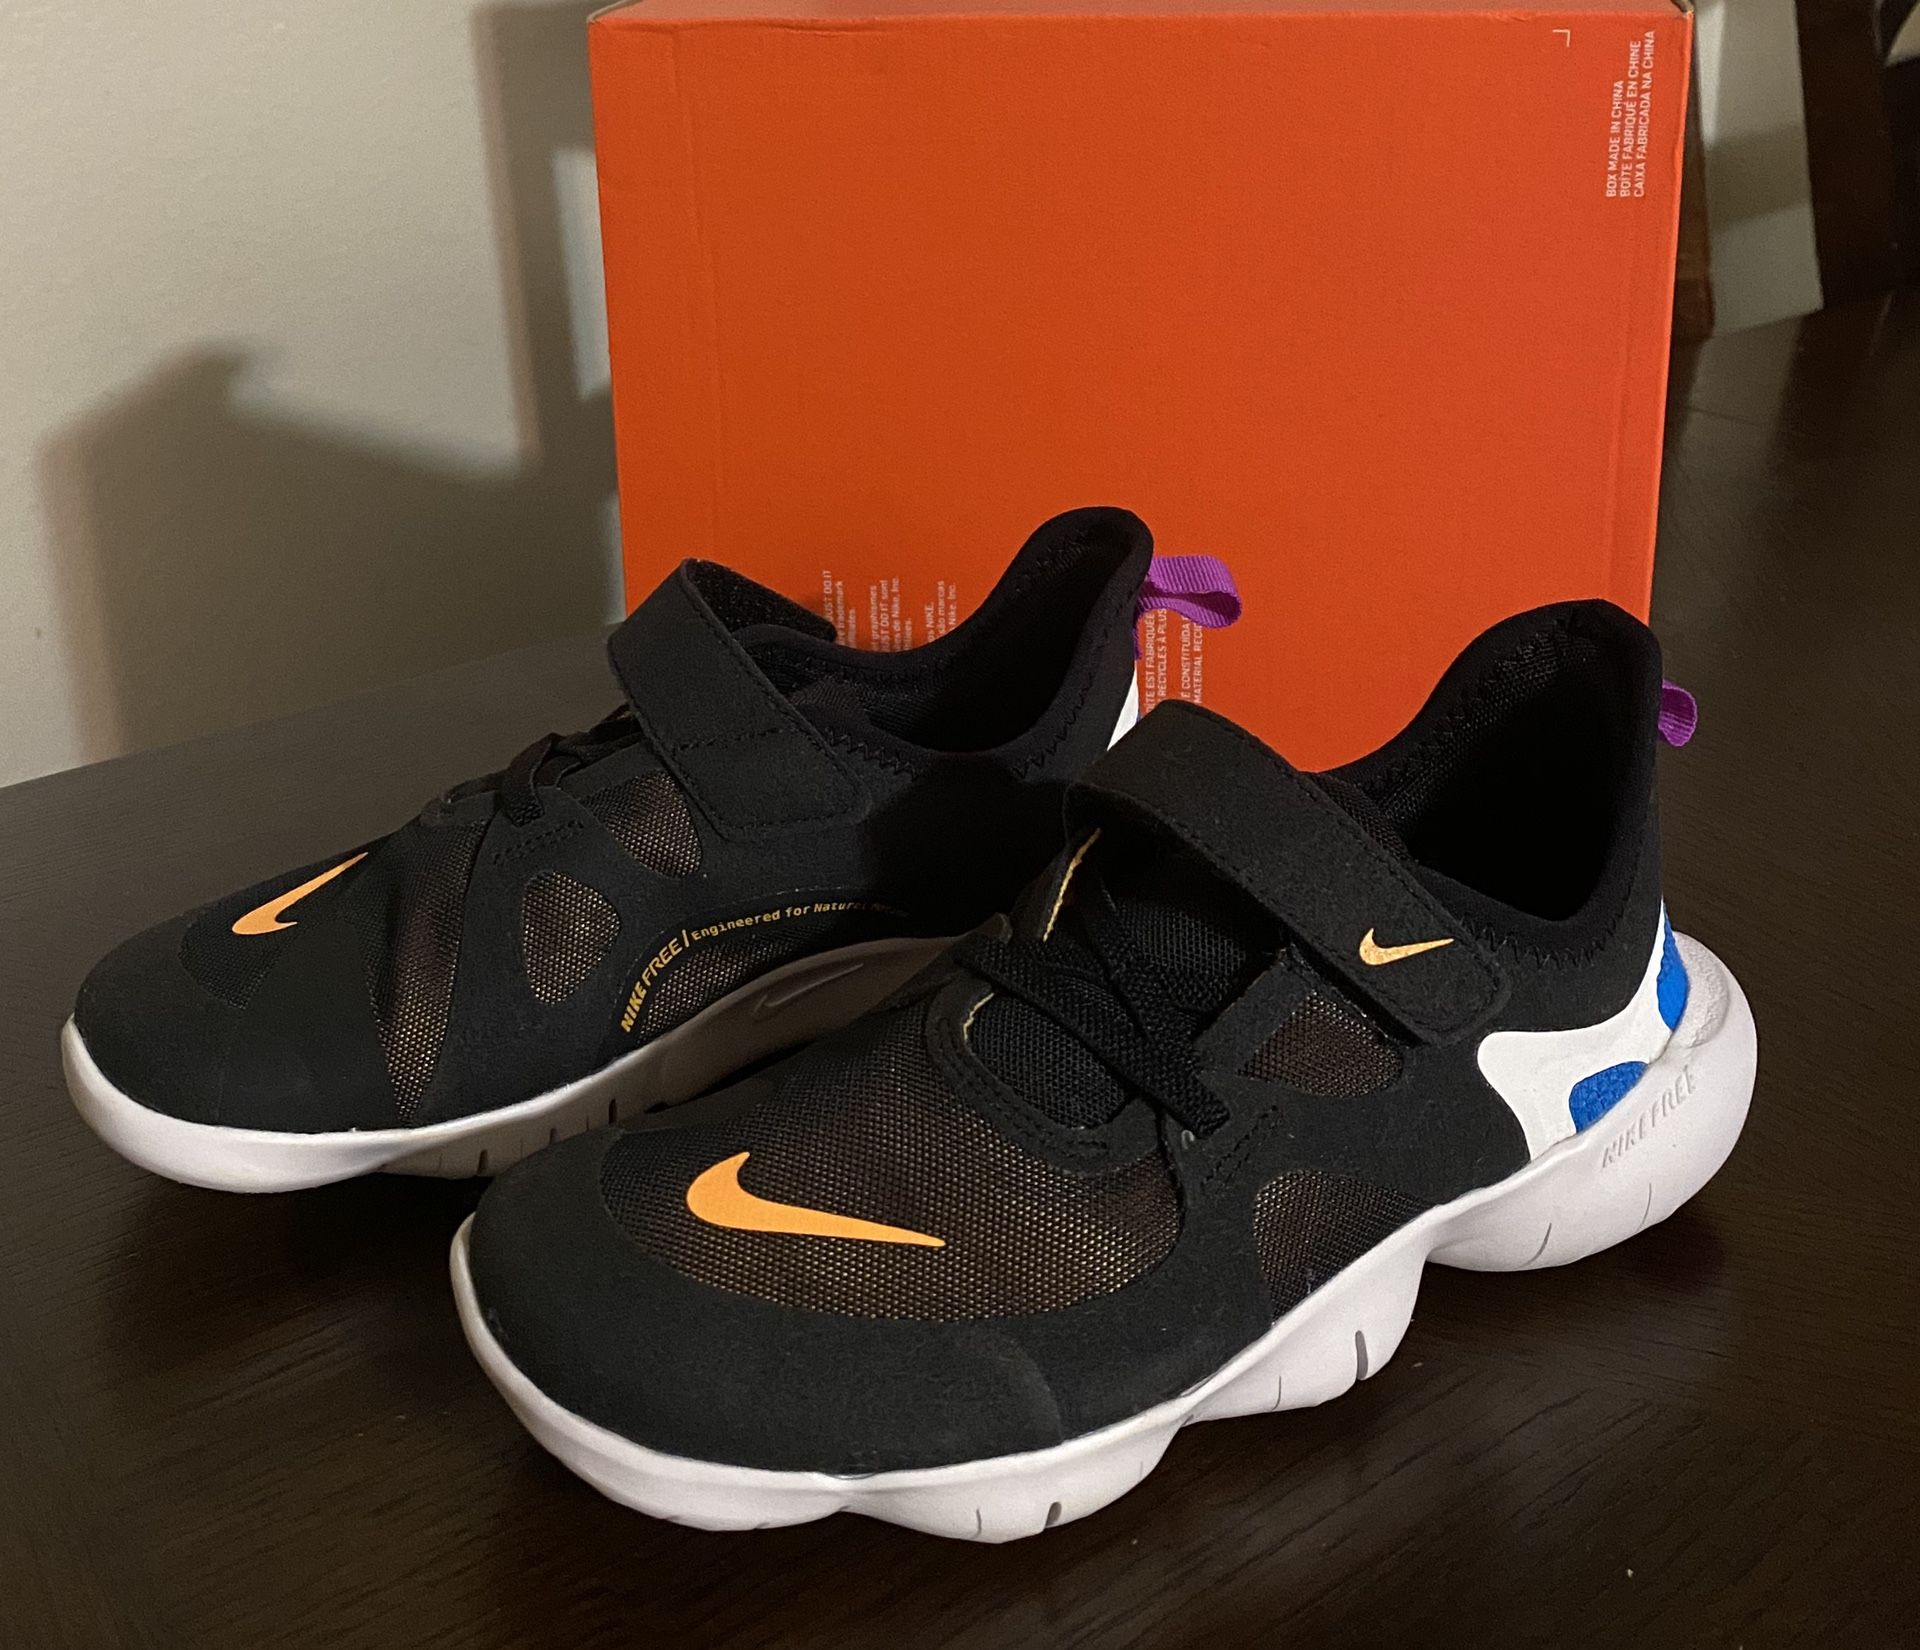 New Nike shoes for boys Size 1